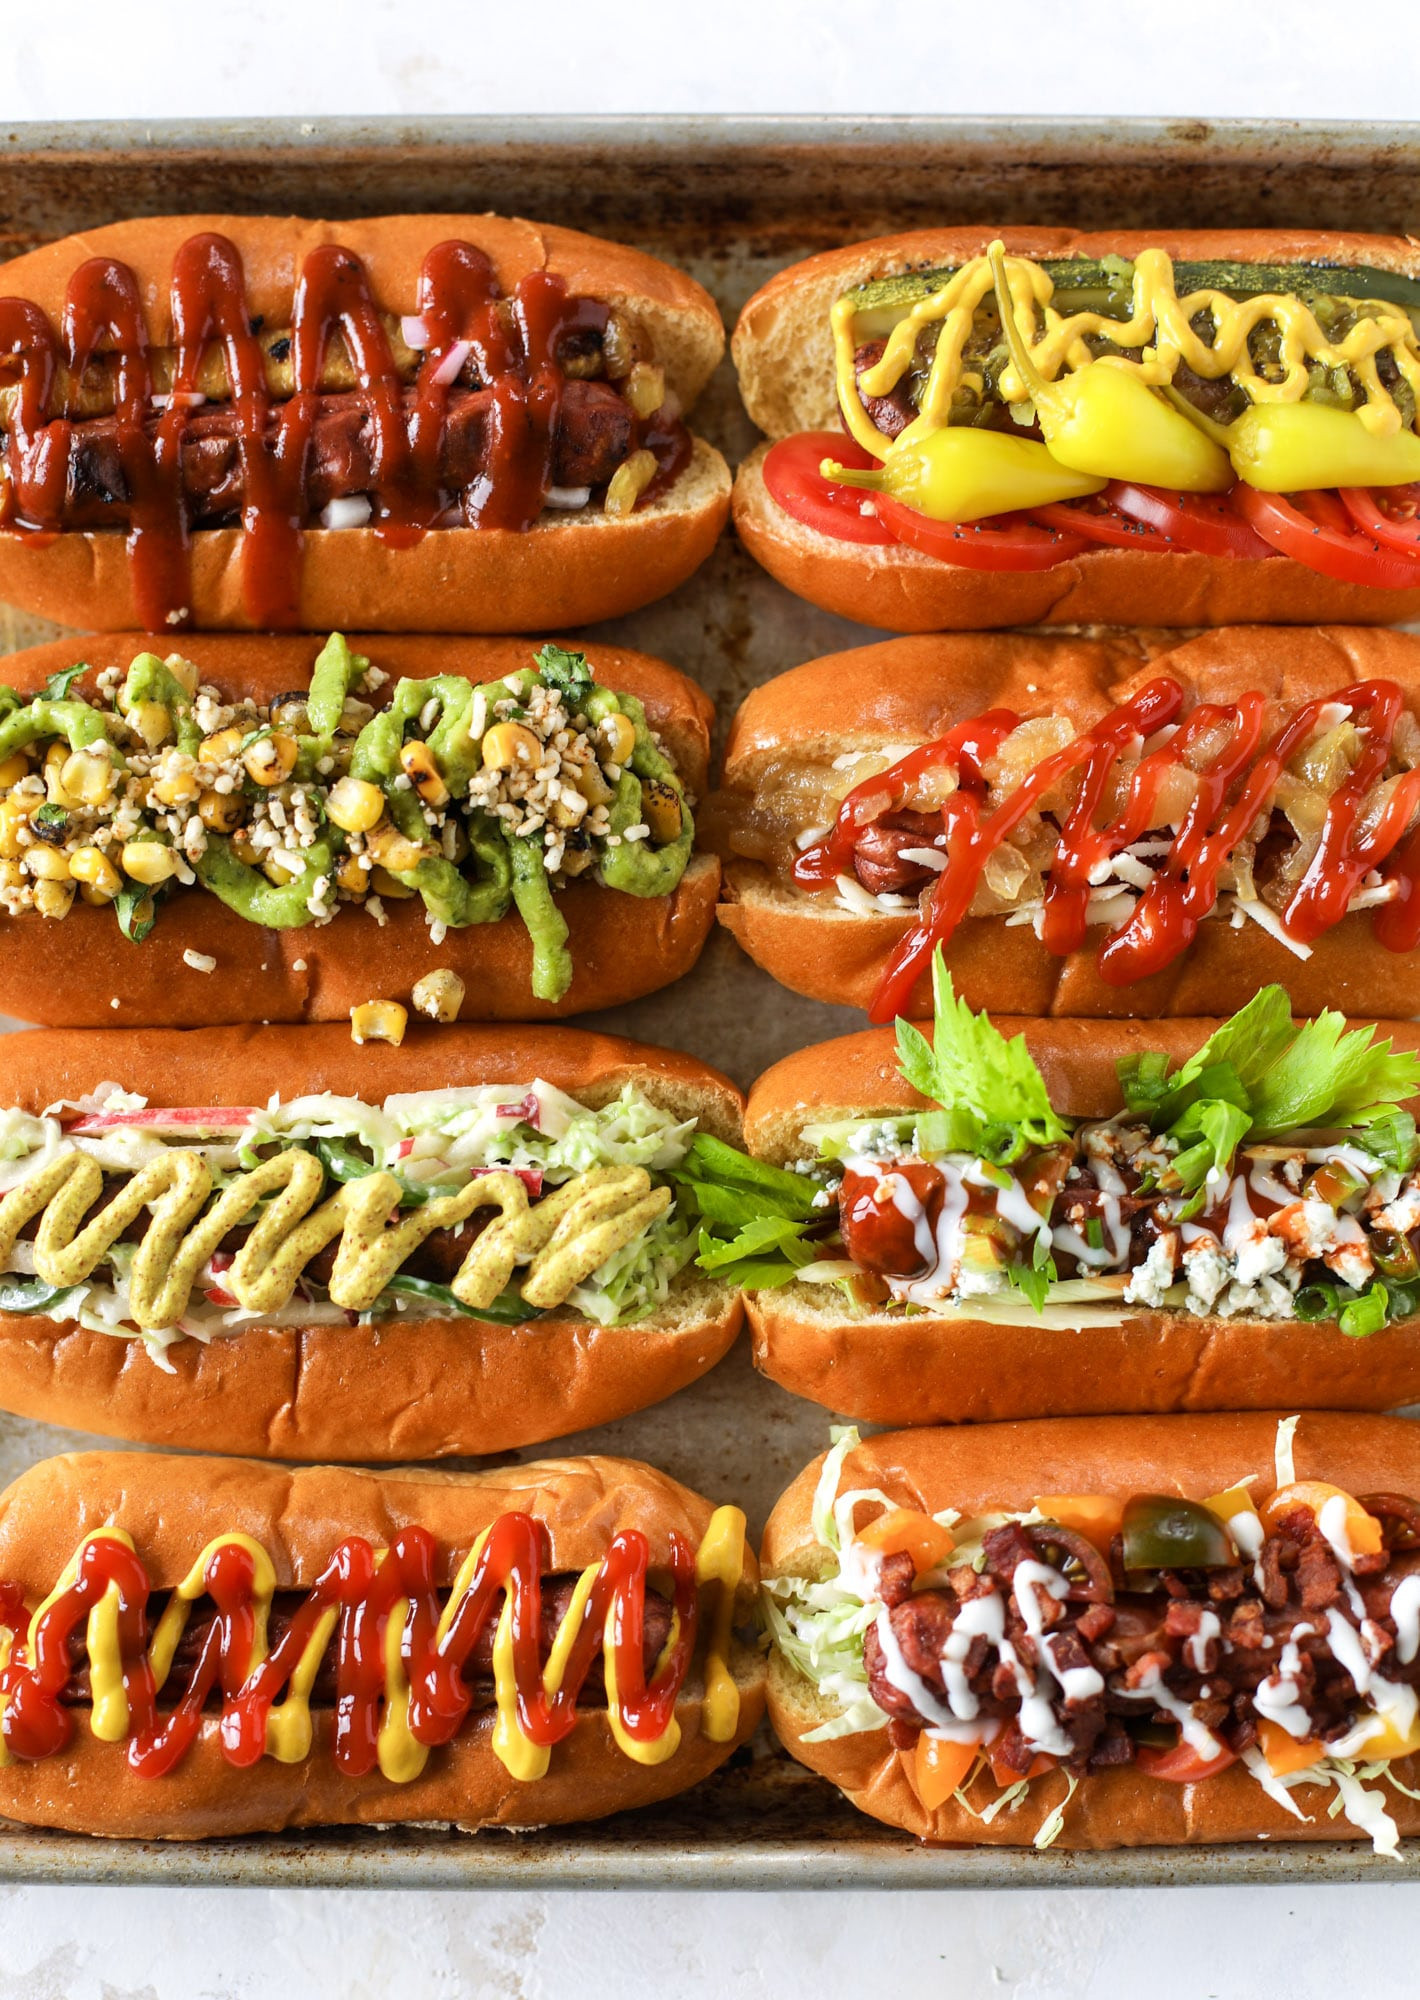 Hot Dogs Condiments
 Hot Dog Bar How to Make a Hot Dog Bar 8 Fancy Hot Dogs